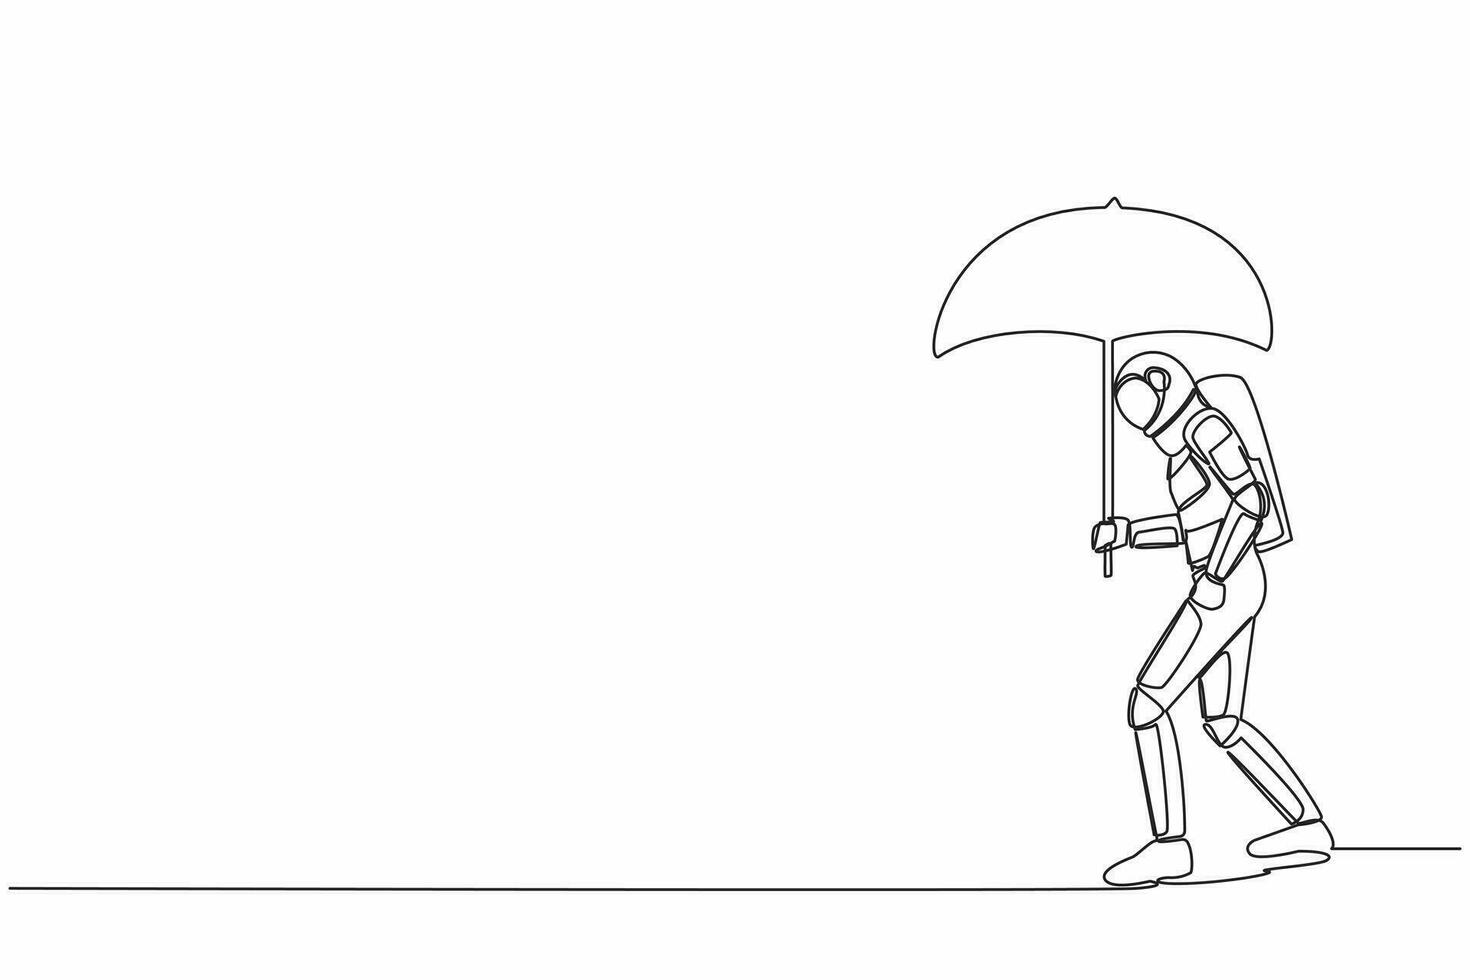 Single one line drawing young astronaut walking with umbrella under rain cloud. Failed in spacecraft exploration project. Cosmic galaxy space. Continuous line draw graphic design vector illustration